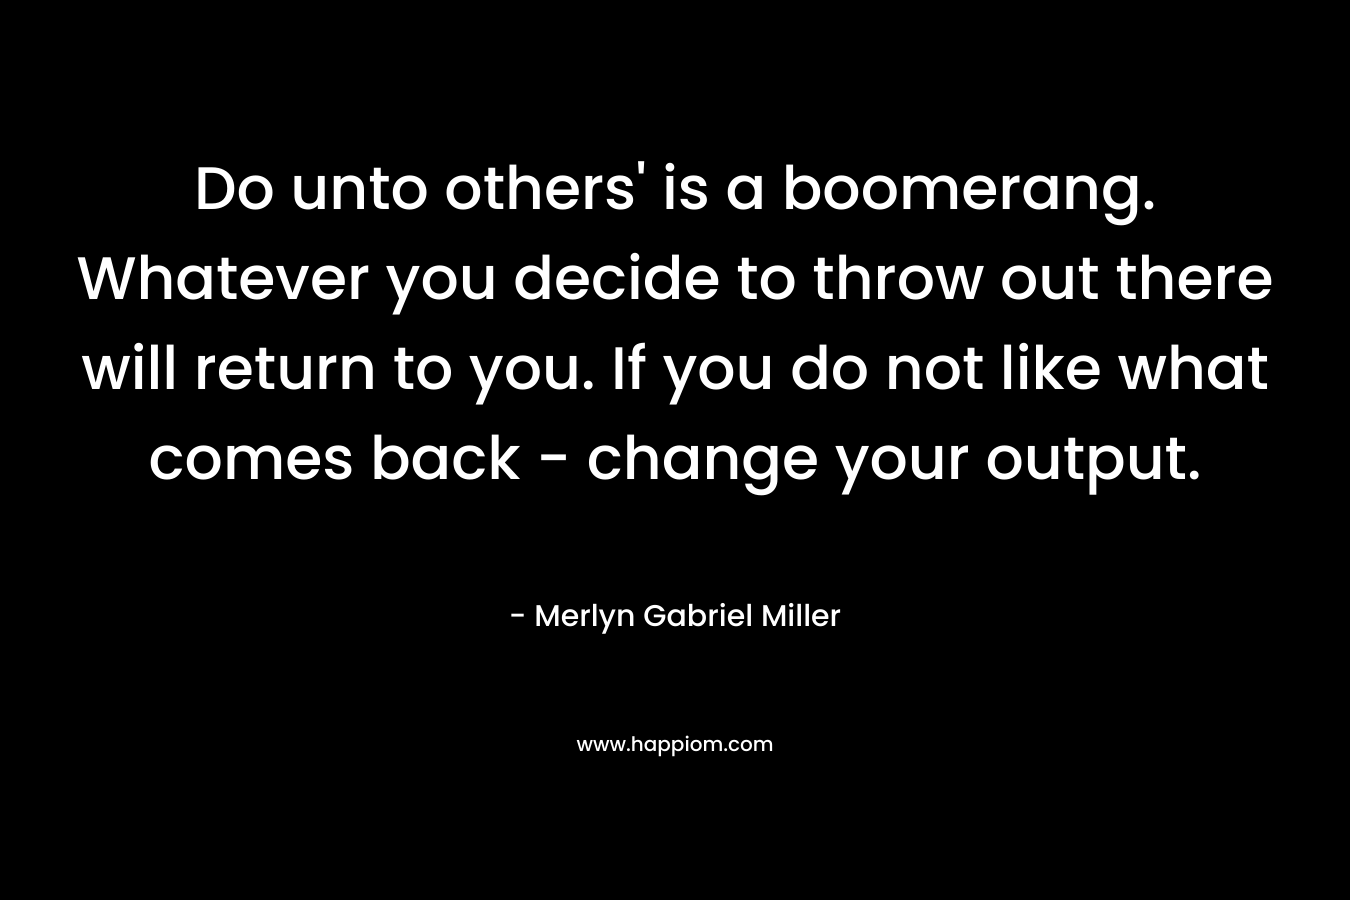 Do unto others’ is a boomerang. Whatever you decide to throw out there will return to you. If you do not like what comes back – change your output. – Merlyn Gabriel Miller